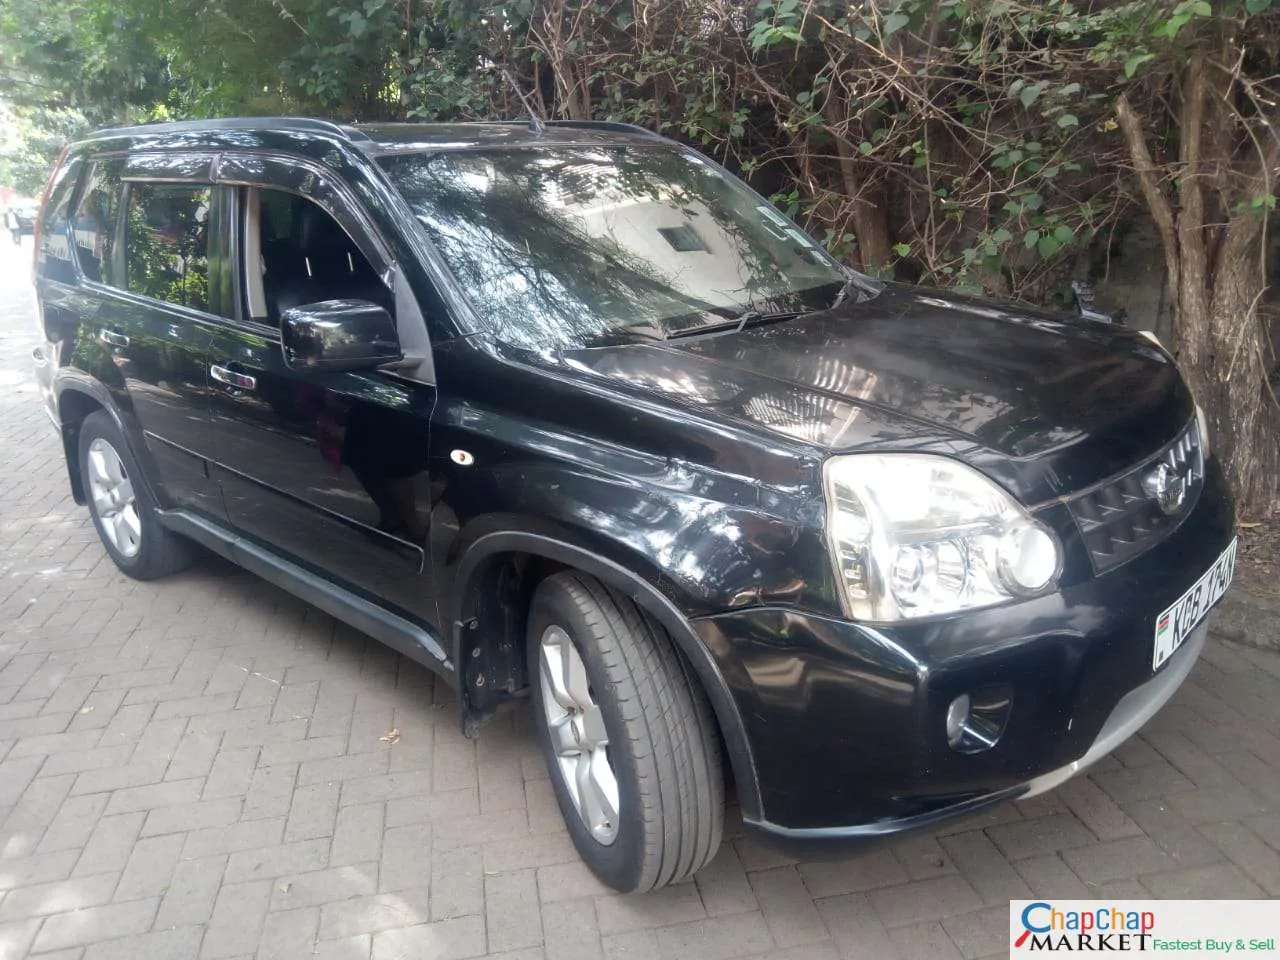 Cars For Sale Cars-Nissan XTRAIL kenya ,Very clean Quick sale You Pay 30% Deposit xtrail for sale in kenya hire purchase installments Trade in Ok Wow!